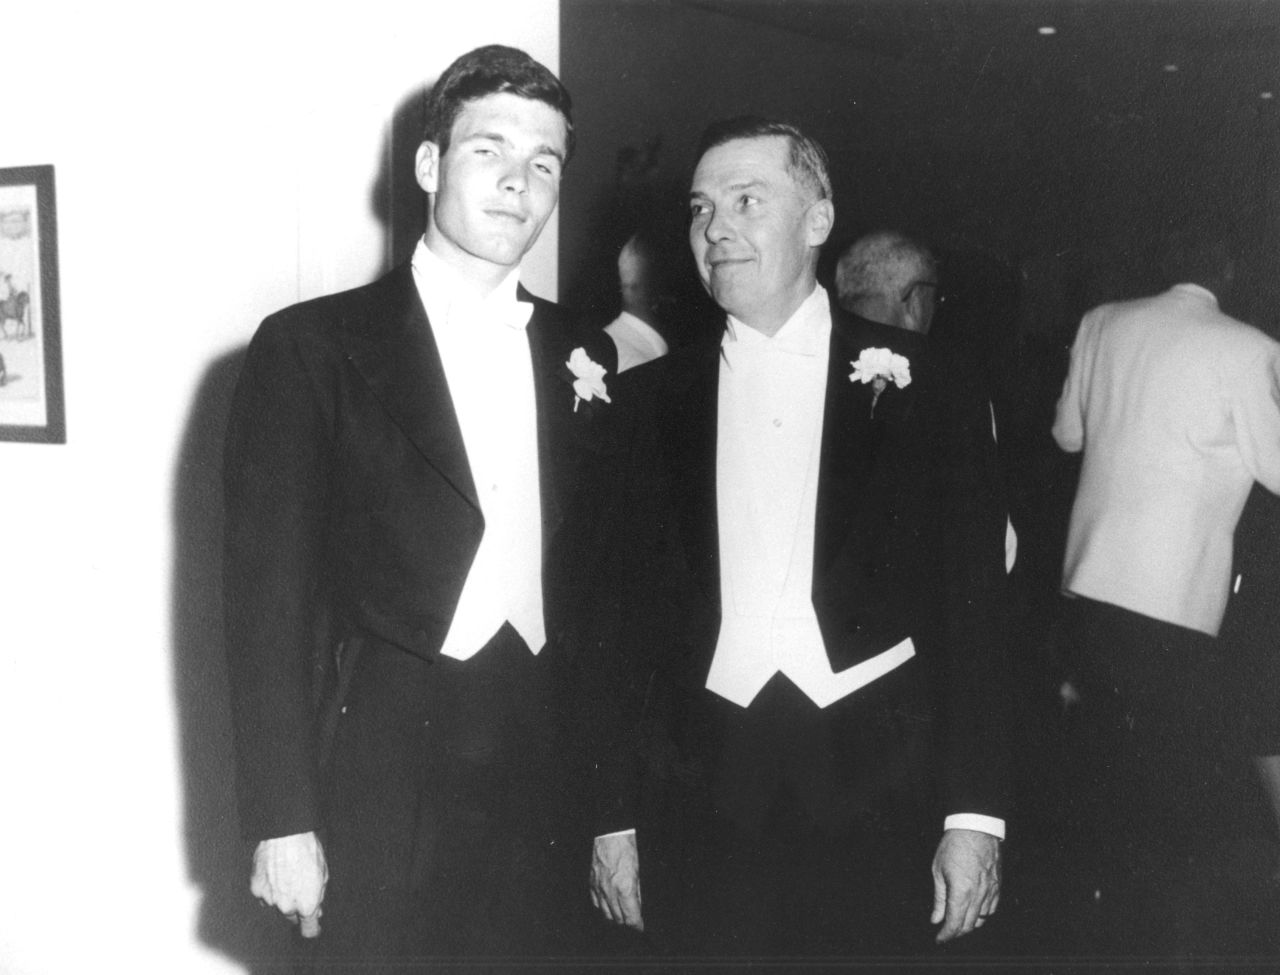 Turner with his father, Ed, on his wedding day. Ed Turner committed suicide three years later, in March 1963.